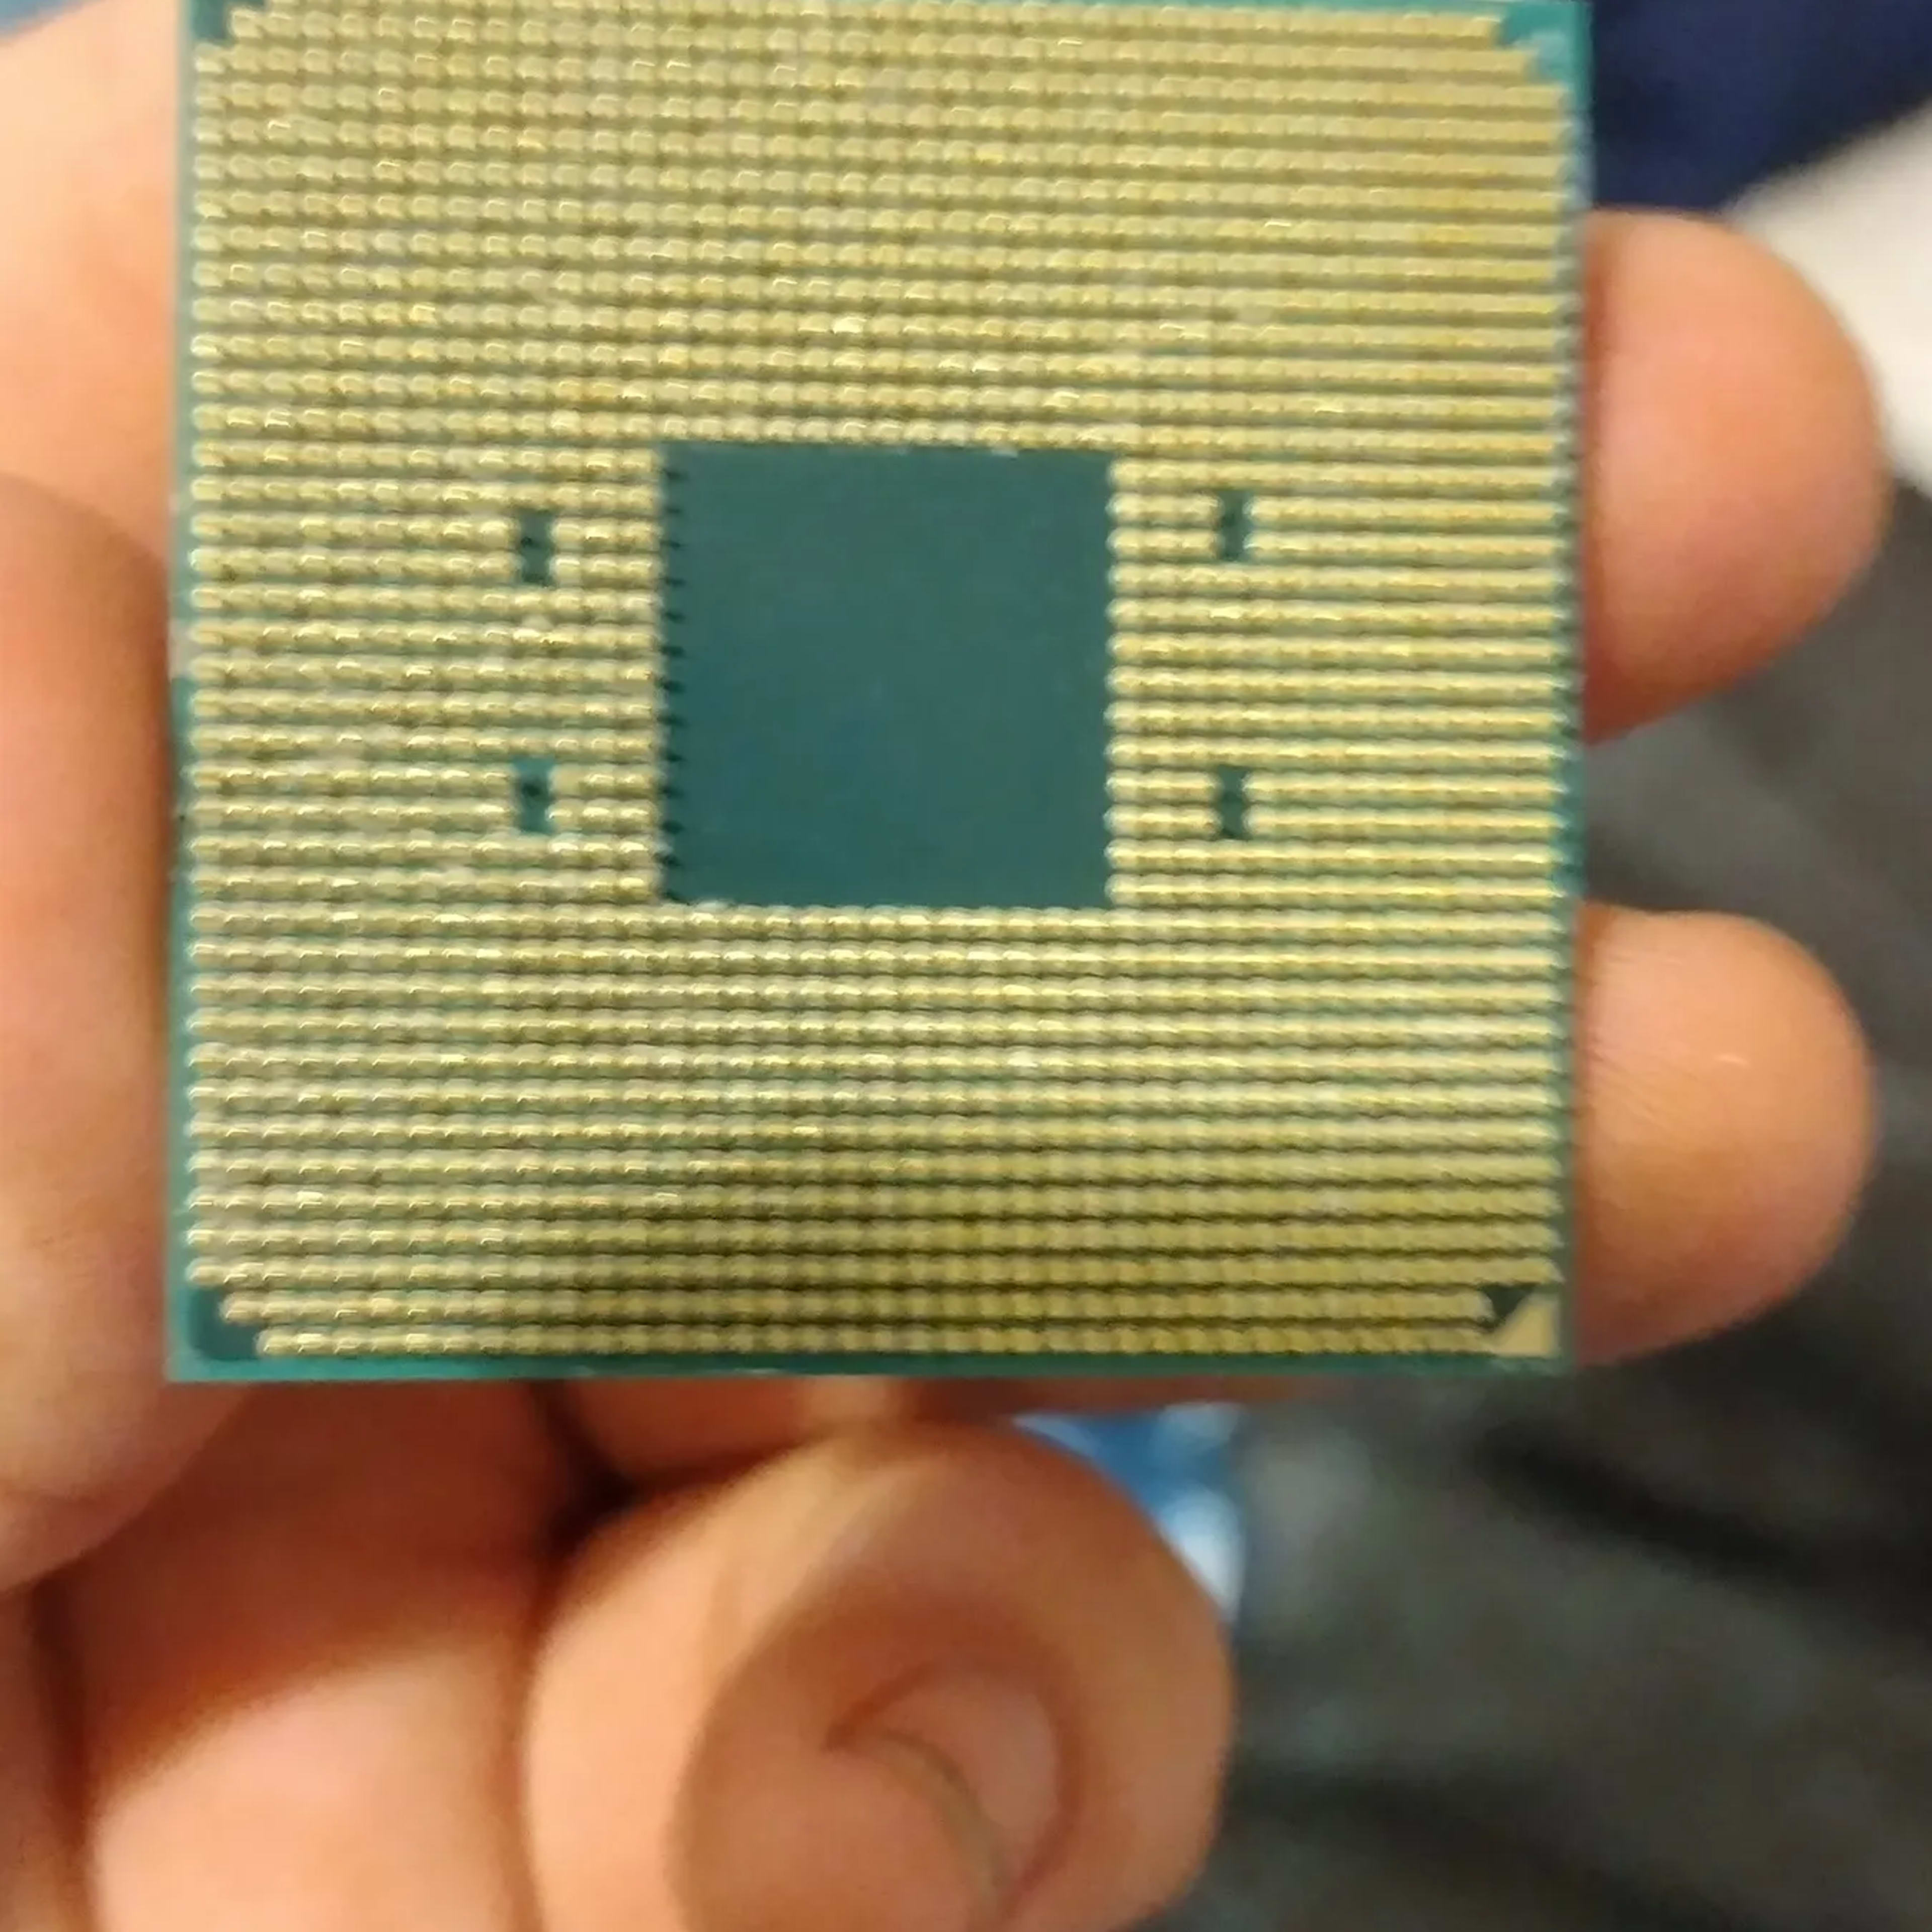 For Sale Ryzen 3 1200 USED/GOOD - comes with optional fan